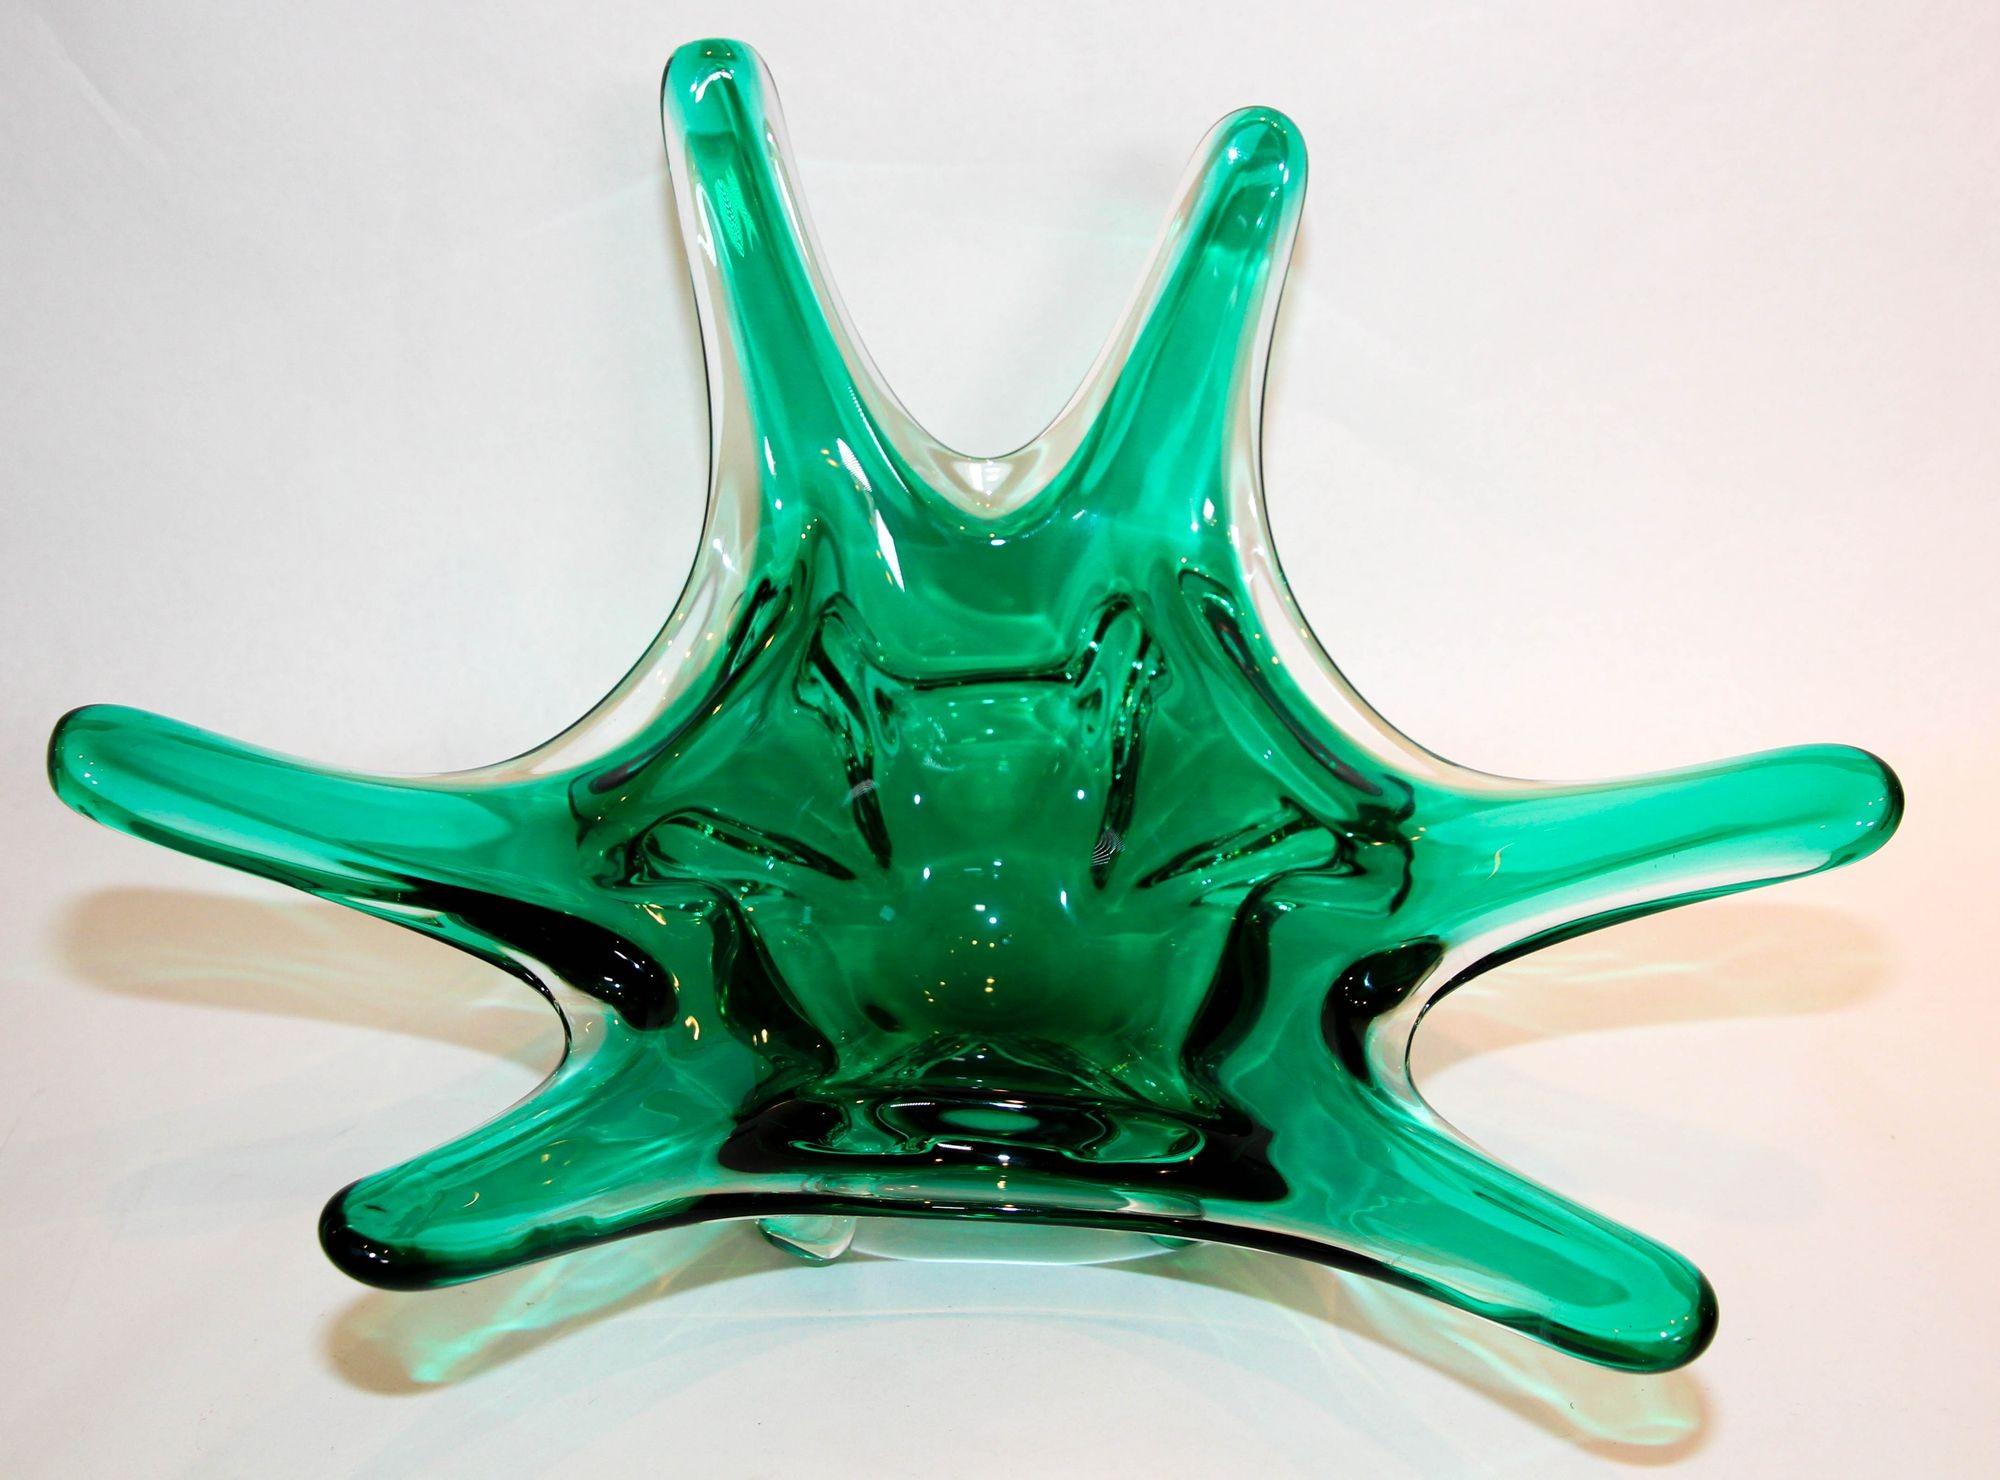 Vintage Mid-Century Modern Emerald Green Large Murano Italian Art Glass Bowl centerpiece circa 1950.
Gorgeous hand blown Murano art glass centerpiece bowl, great statement on any table, very cheerful and decorative large bowl.
Monumental and heavy